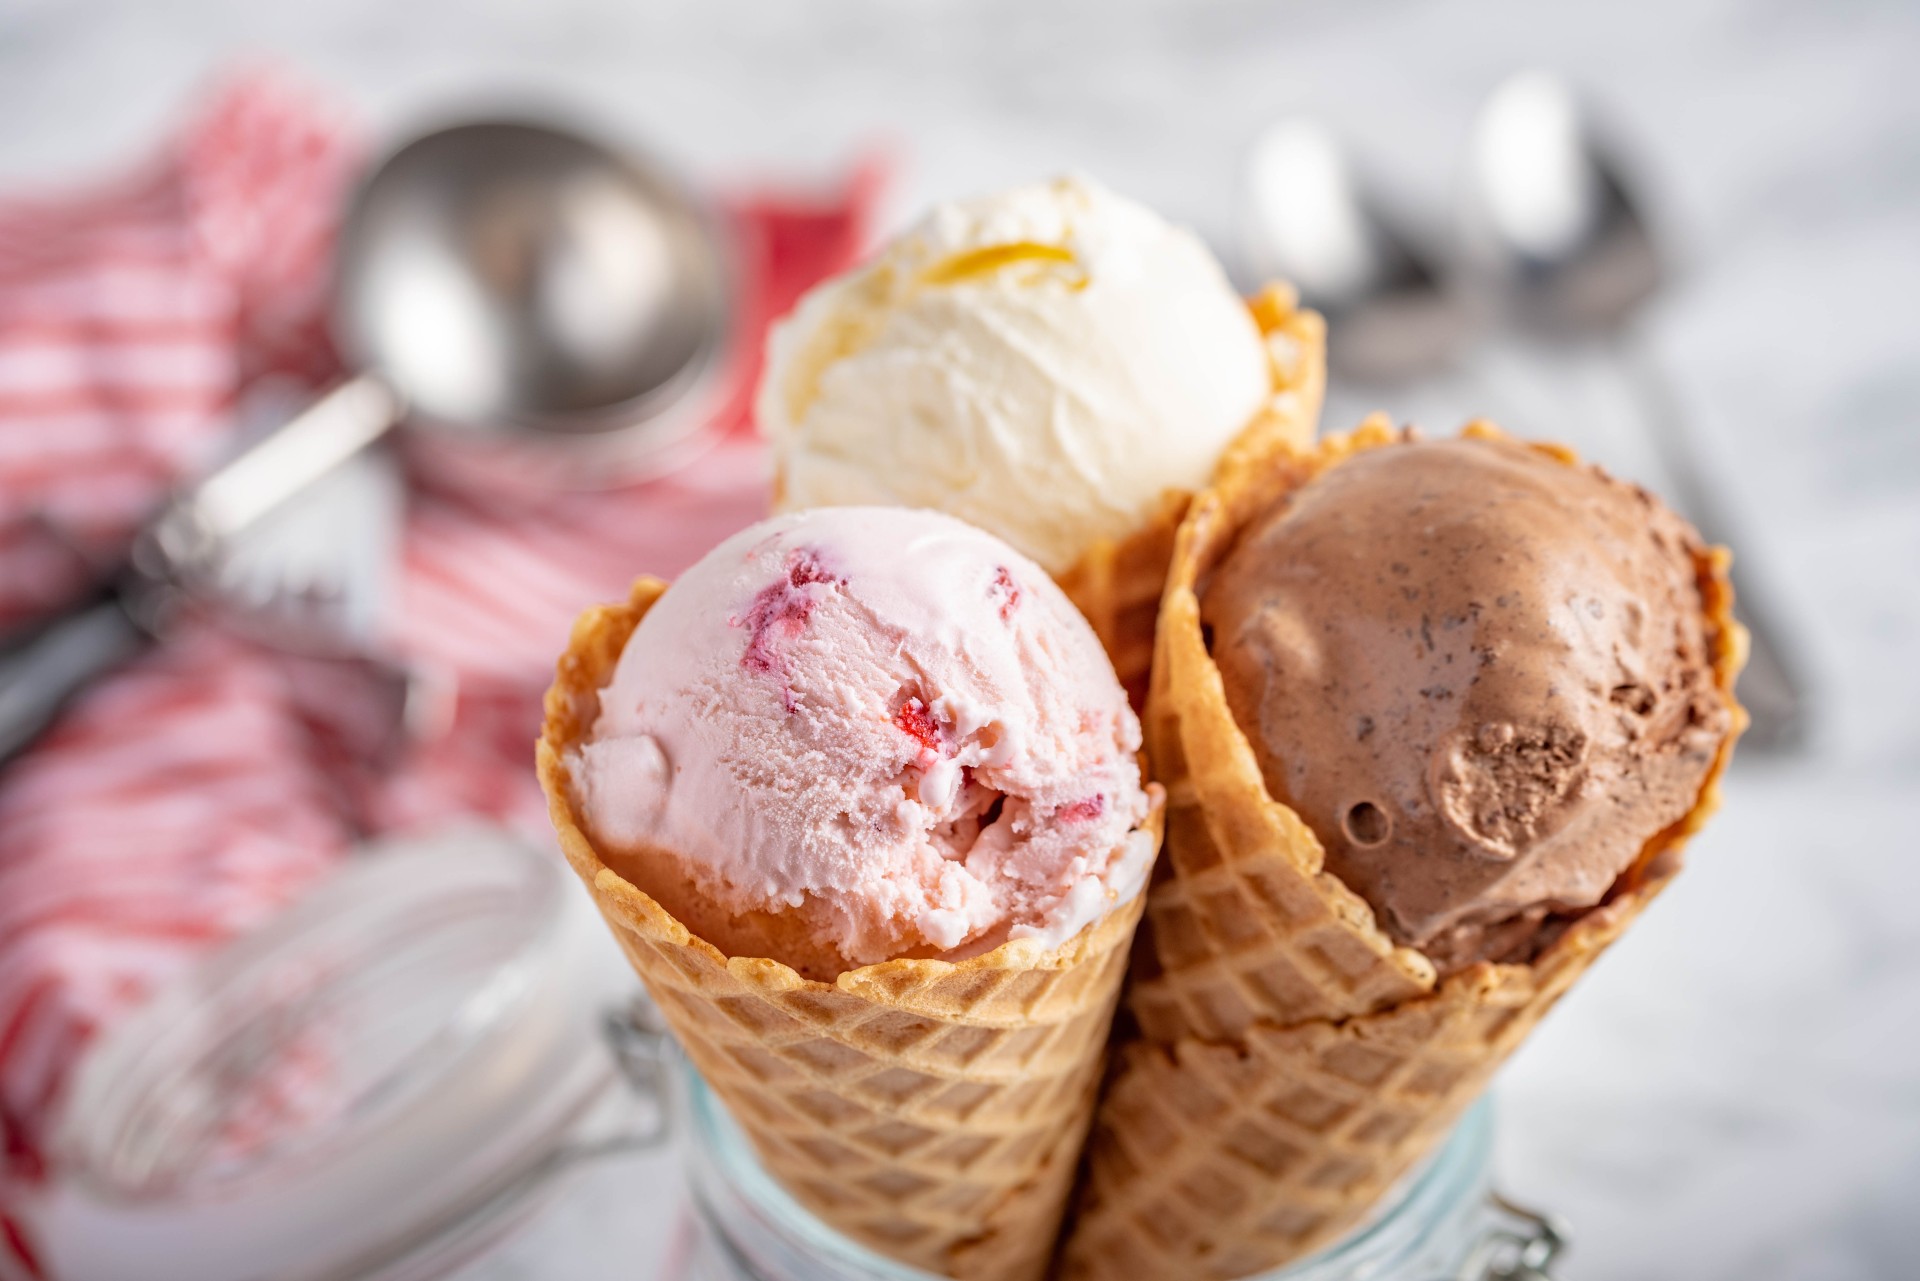 Where to eat the best Ice cream in Split